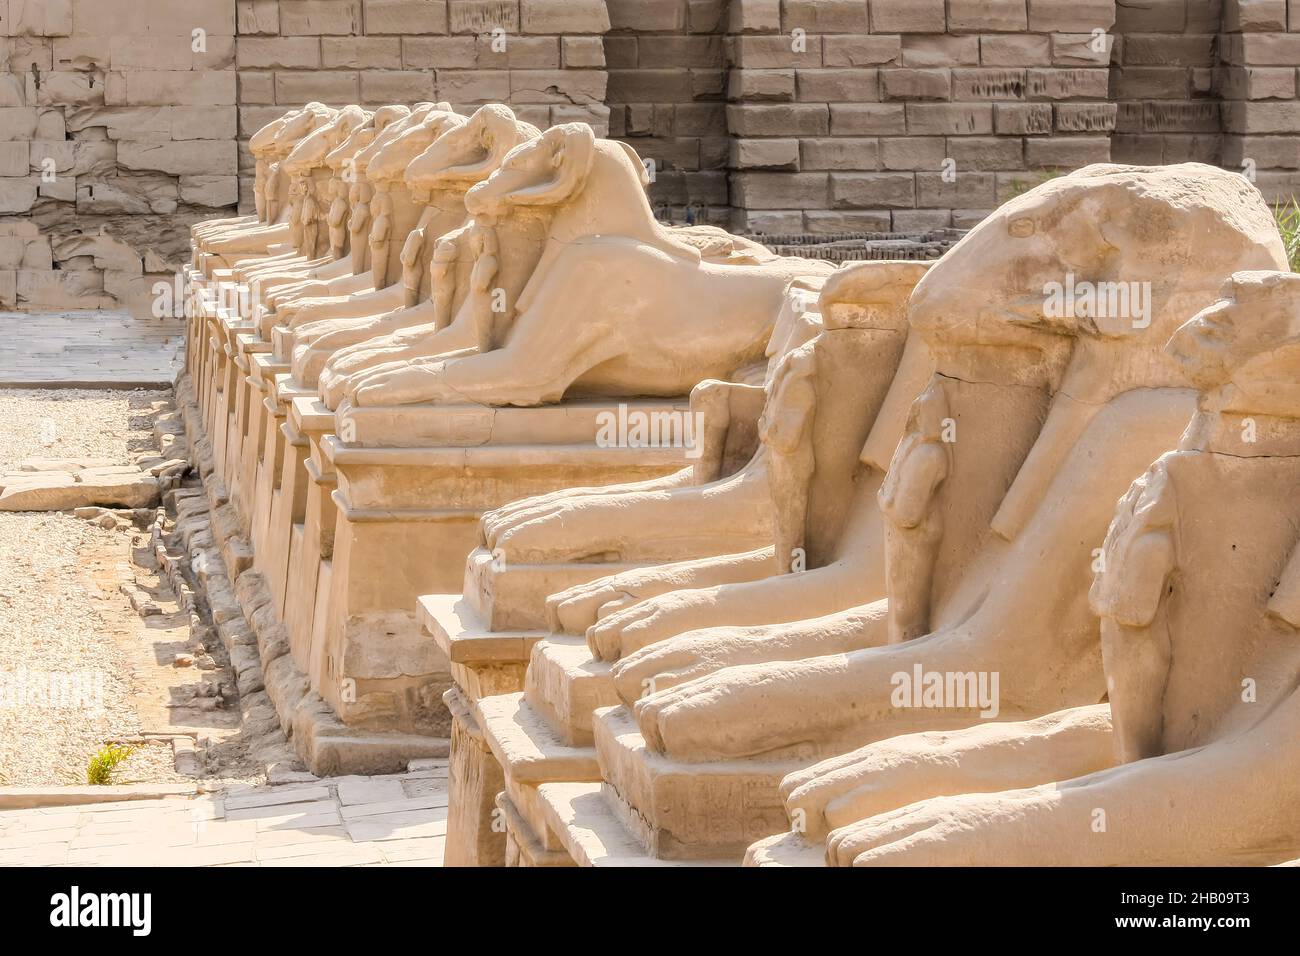 Karnak temple complex in Luxor, Egypt. Criosphinxes alley, sphinxes with the ram heads. Stock Photo